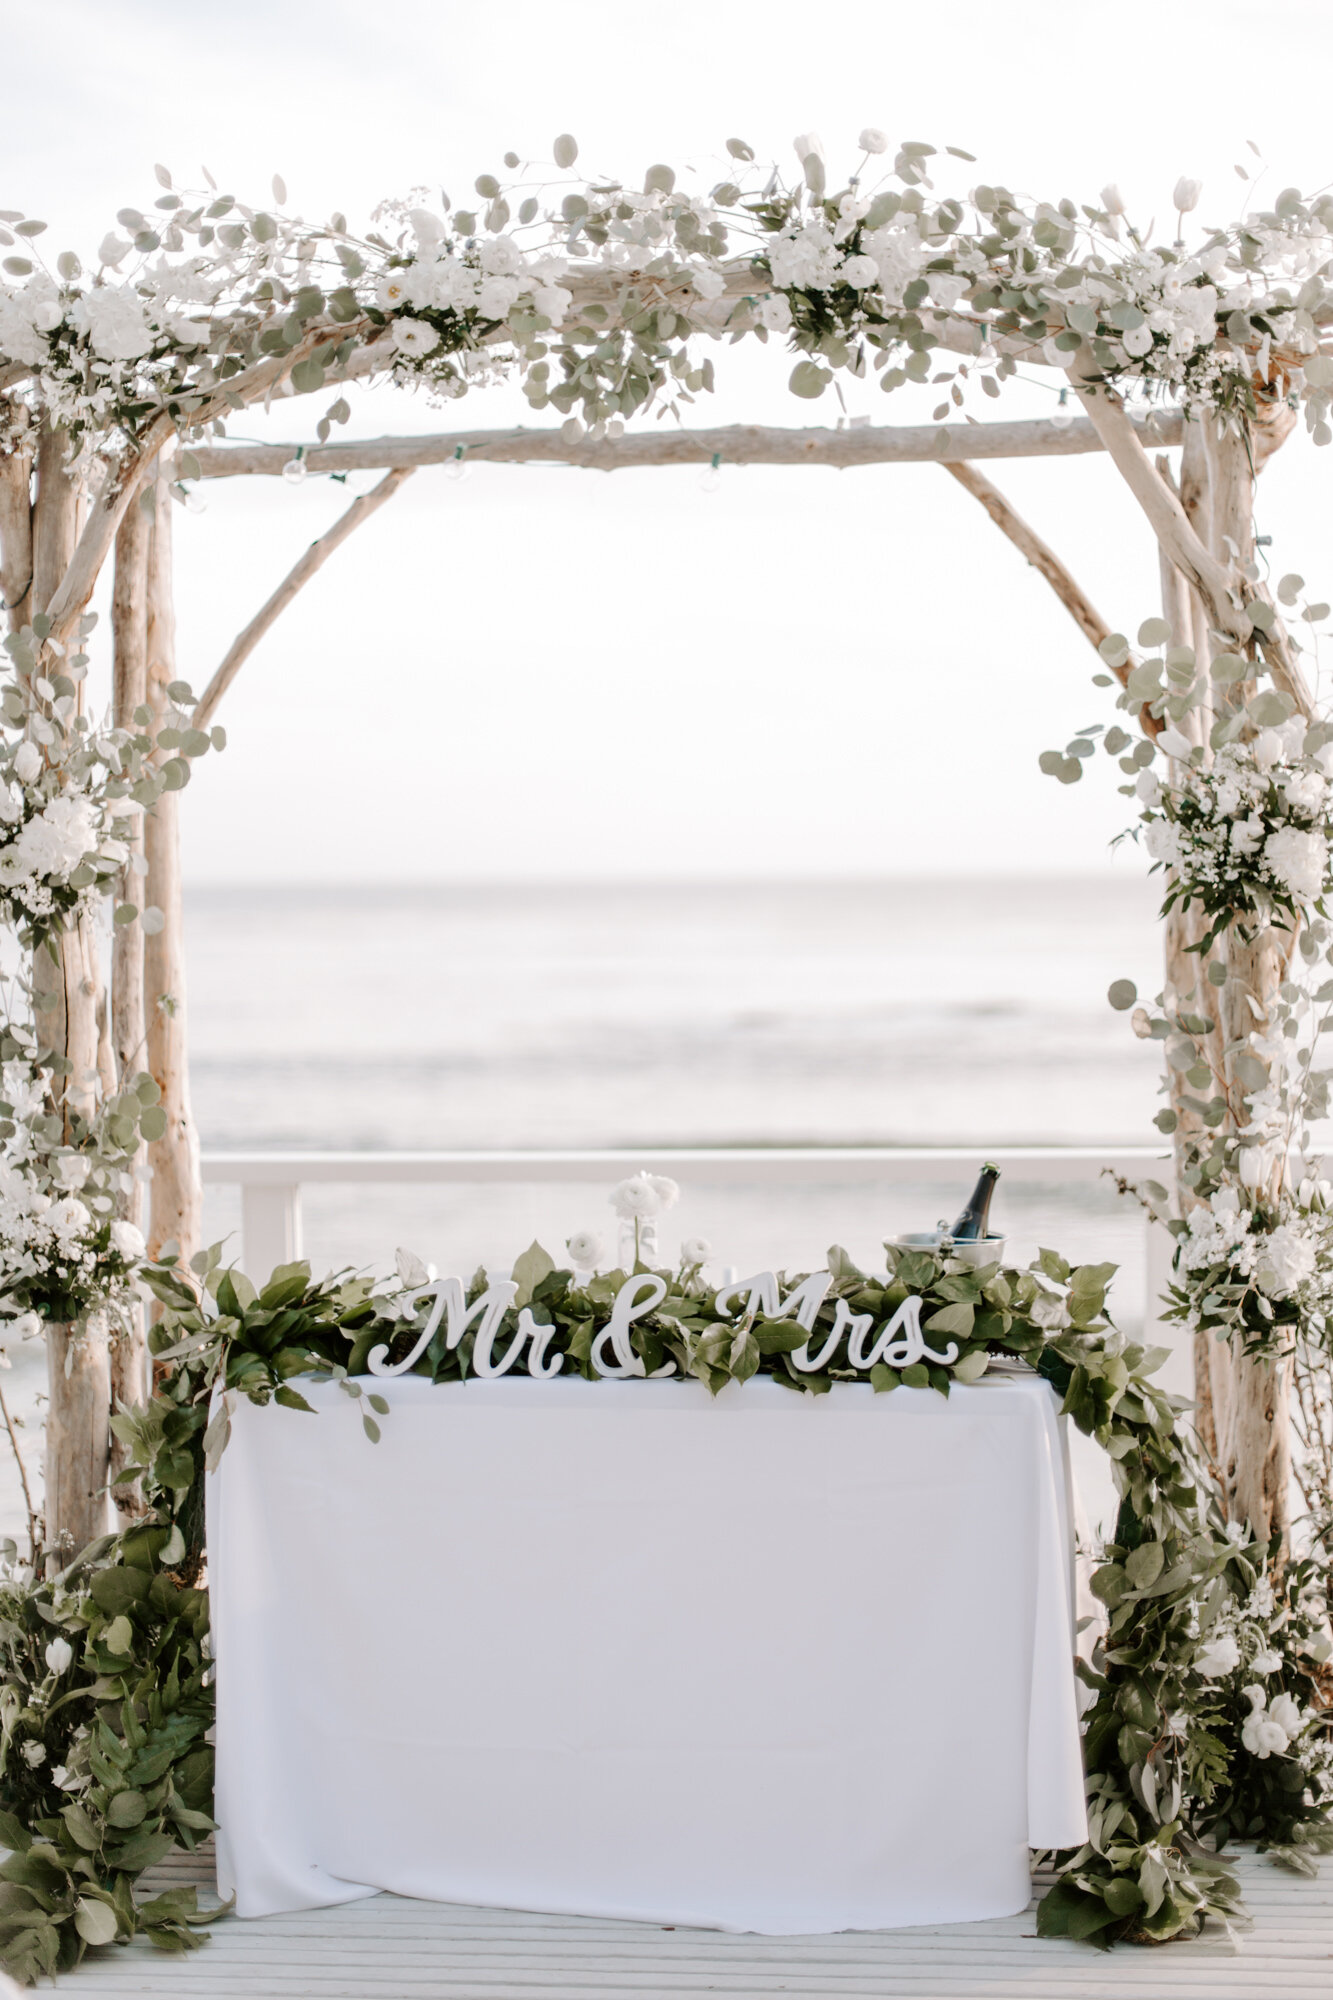 Malibu wedding photographed in Malibu california at a private home with a private beach.  Wedding photos were shot on the beach in Malibu.  This was a boho malibu wedding.  Malibu Wedding Photographer